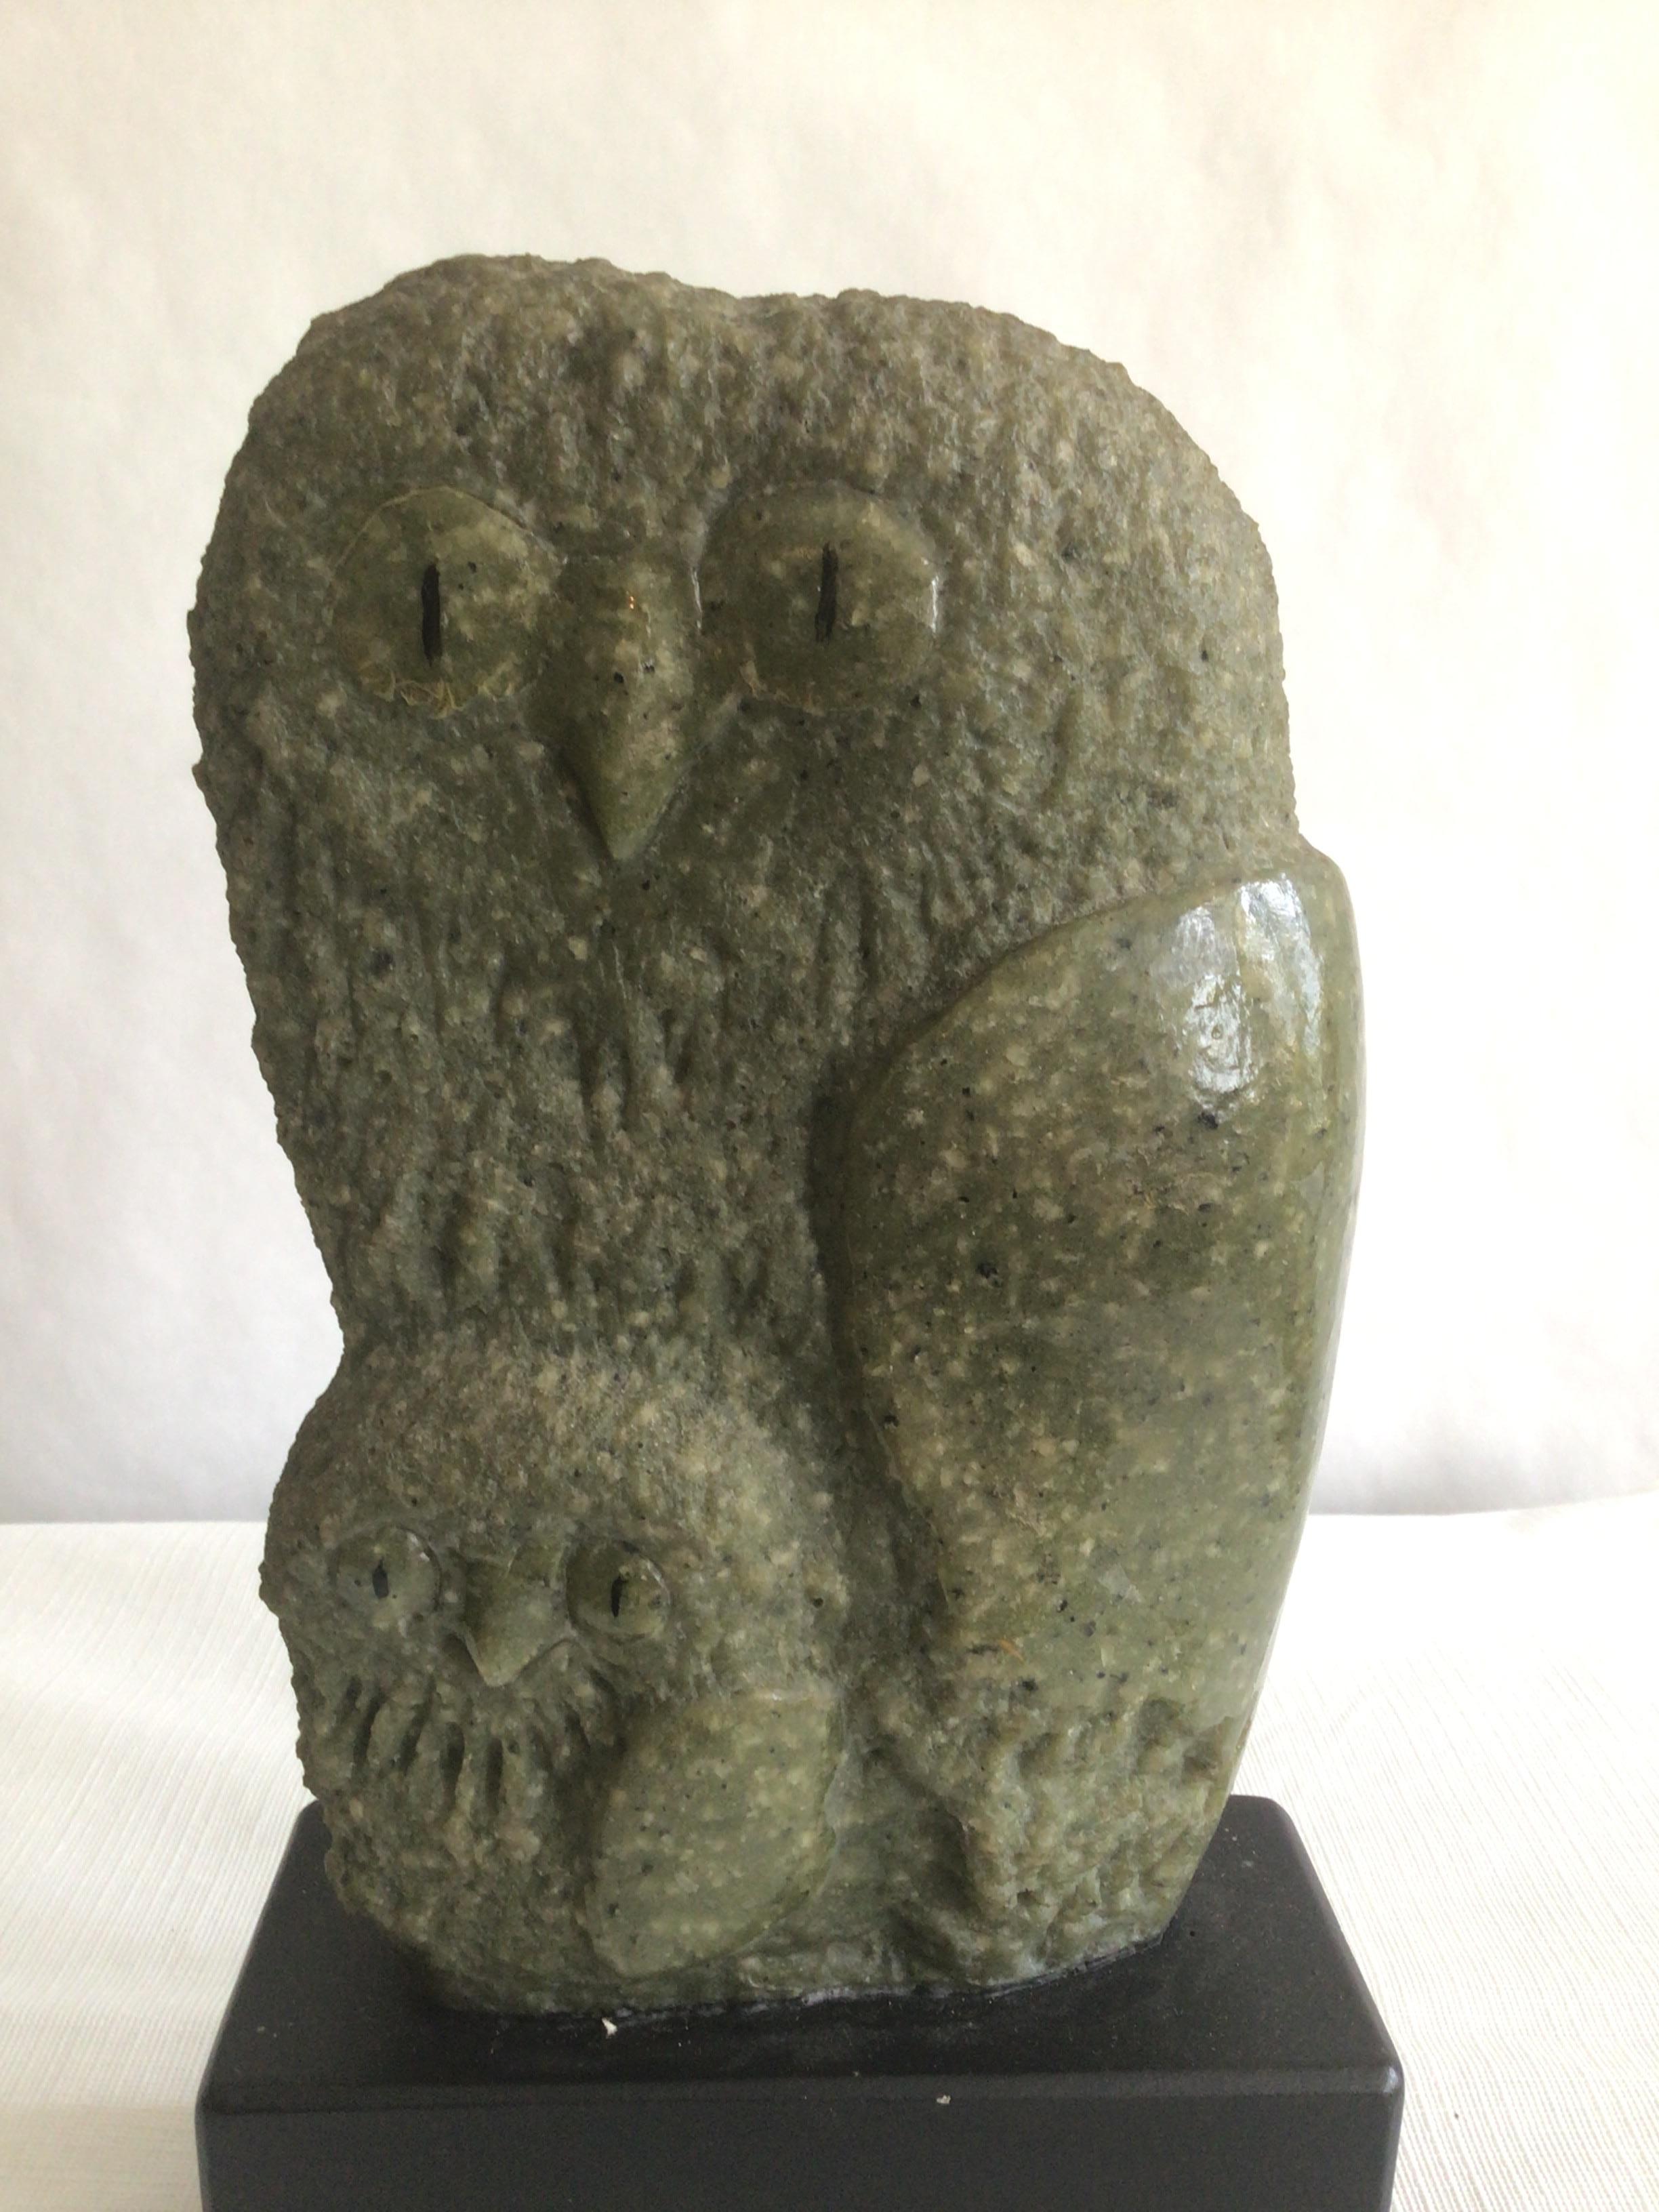 1960s green marble owl sculpture on composition base
Signed by Elison.